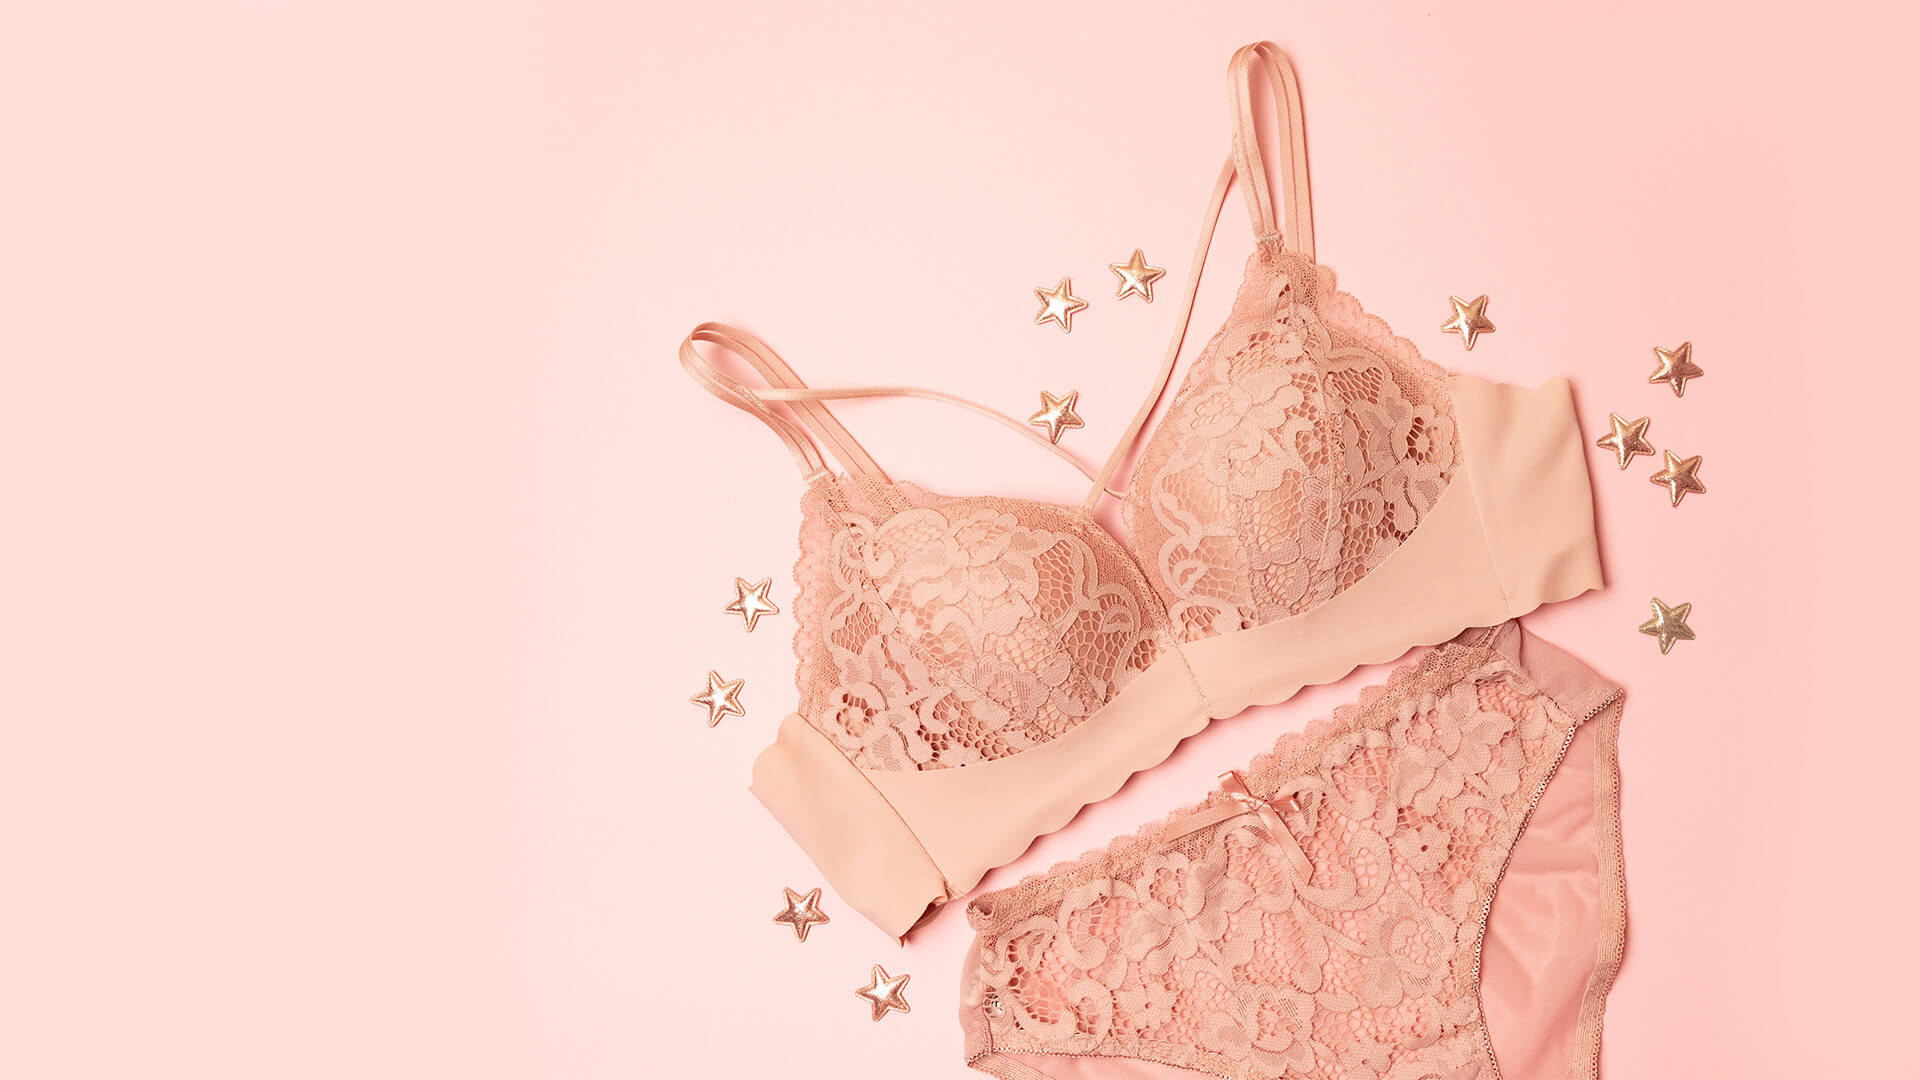 Pink lace bra and knicker set on a pink background